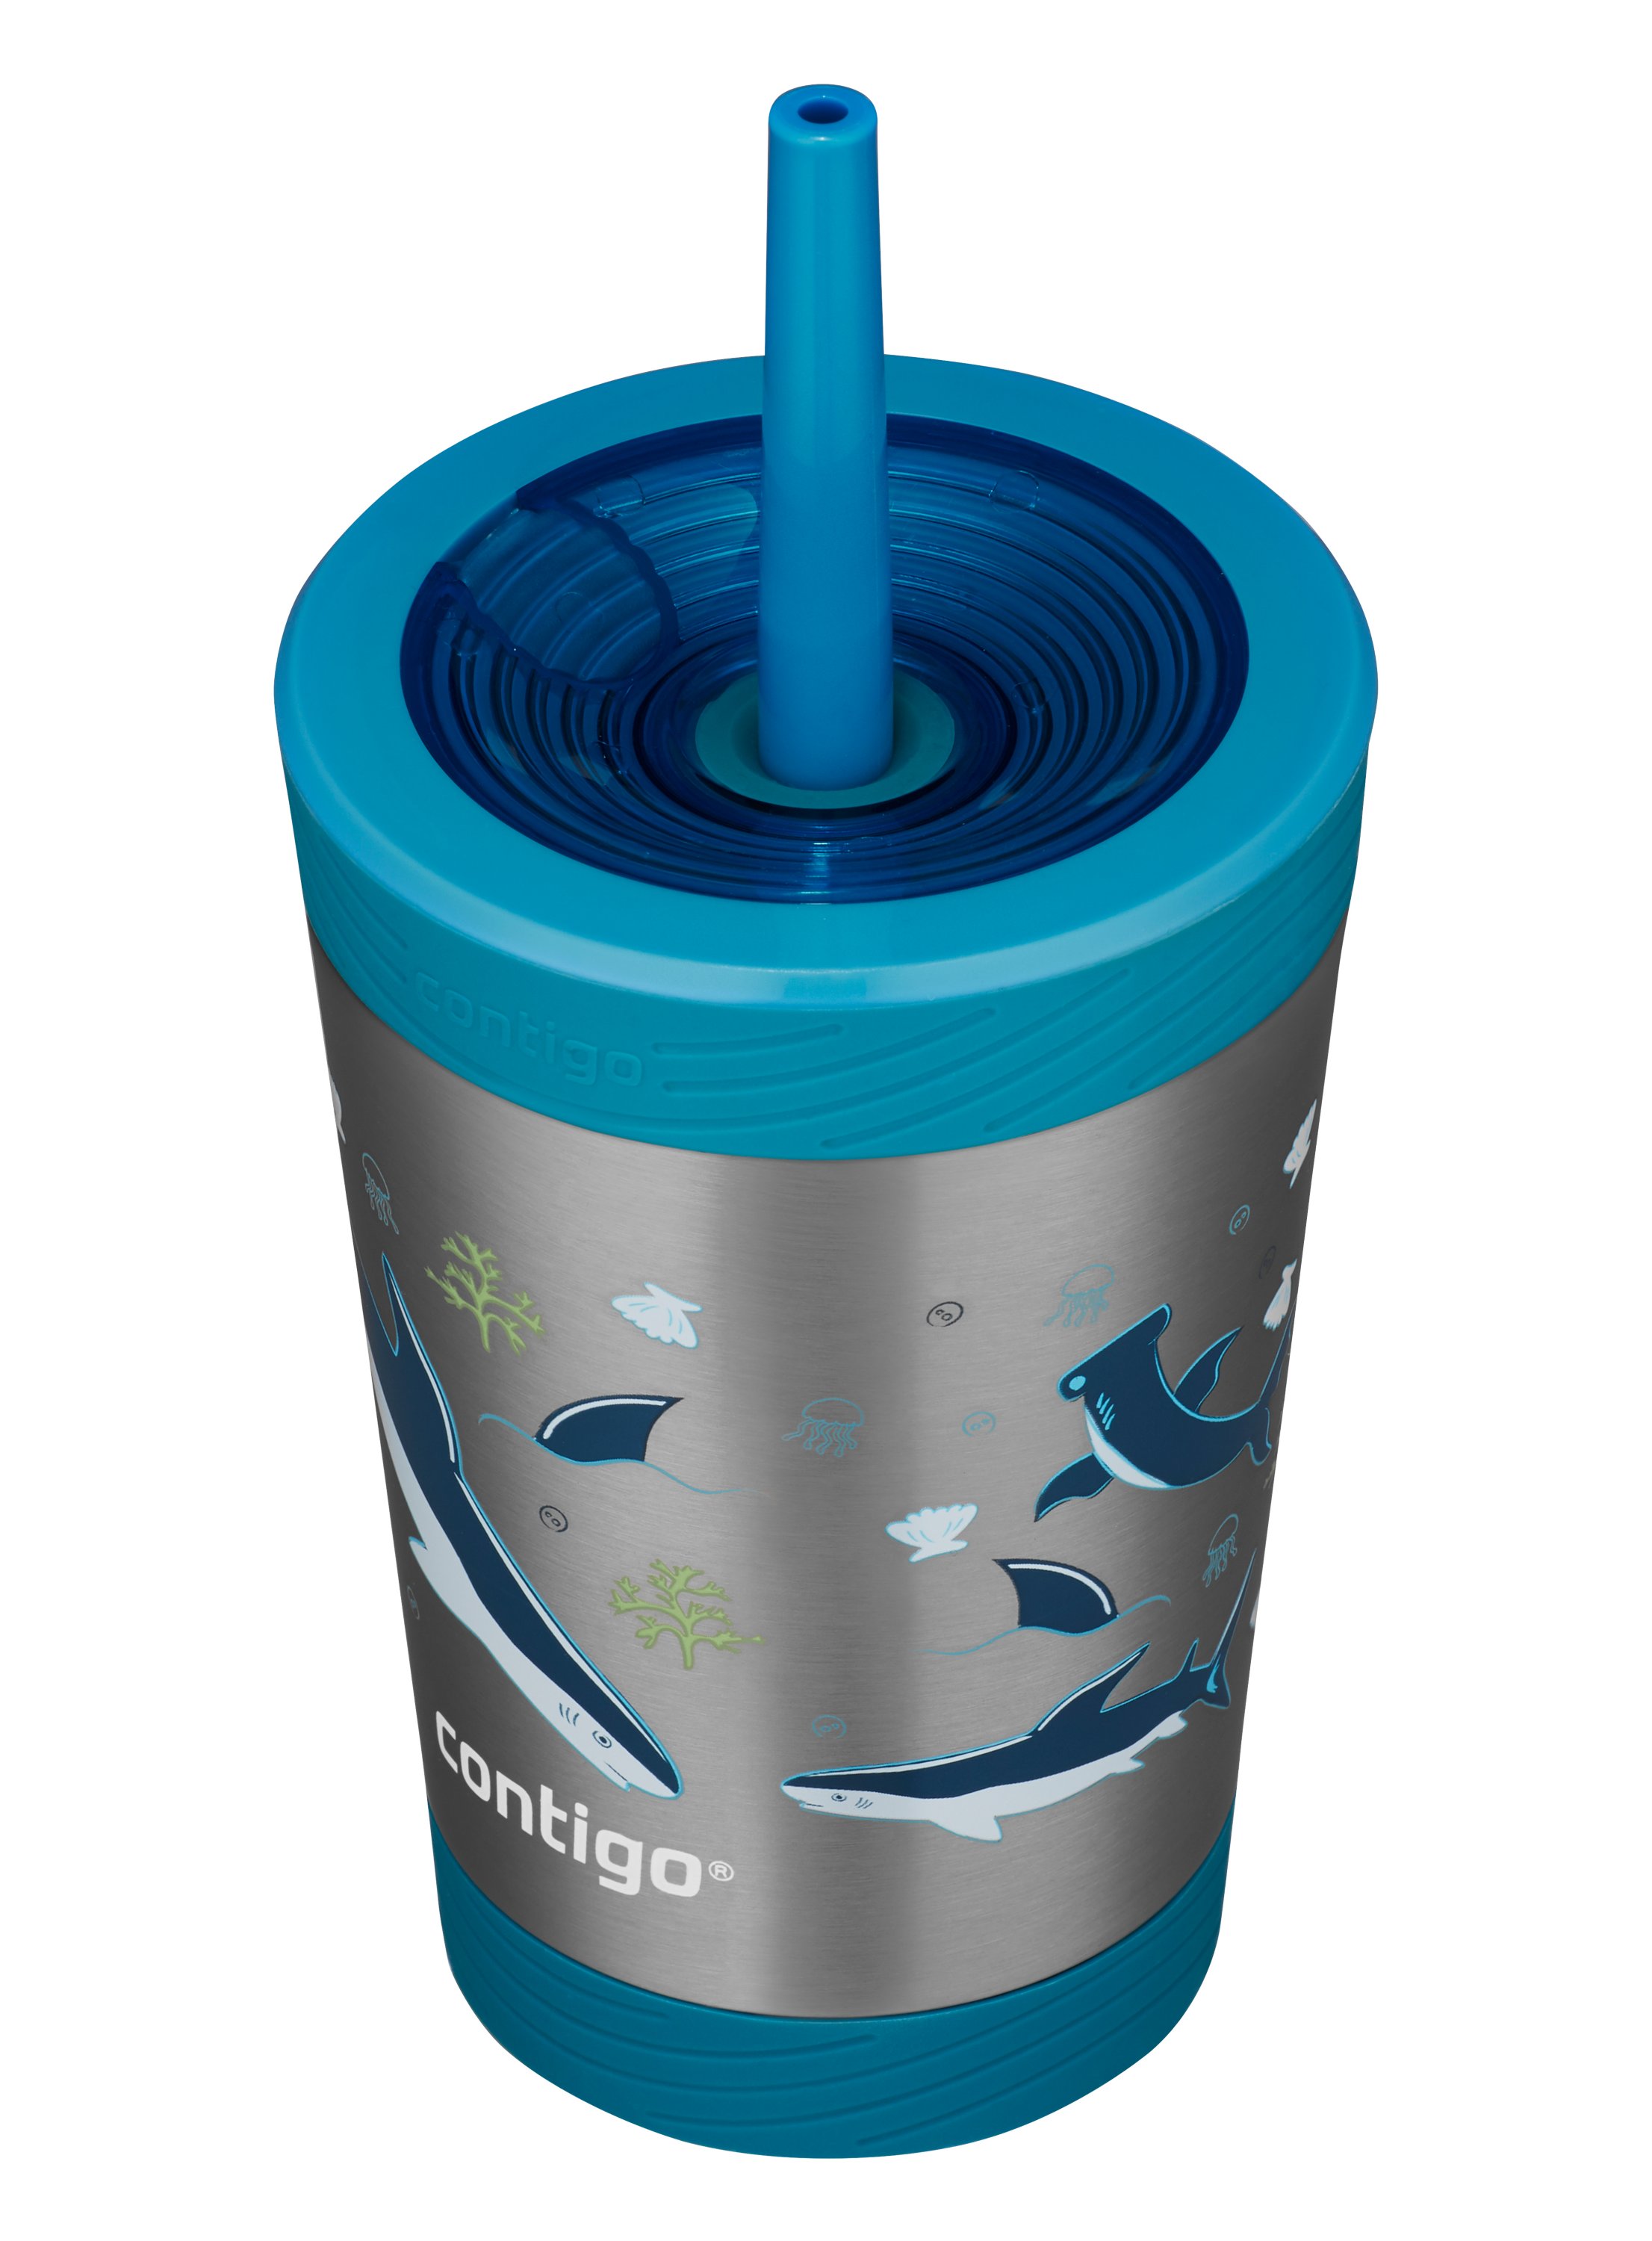 Contigo® Kids Spill-Proof Stainless Steel Tumbler with Straw and